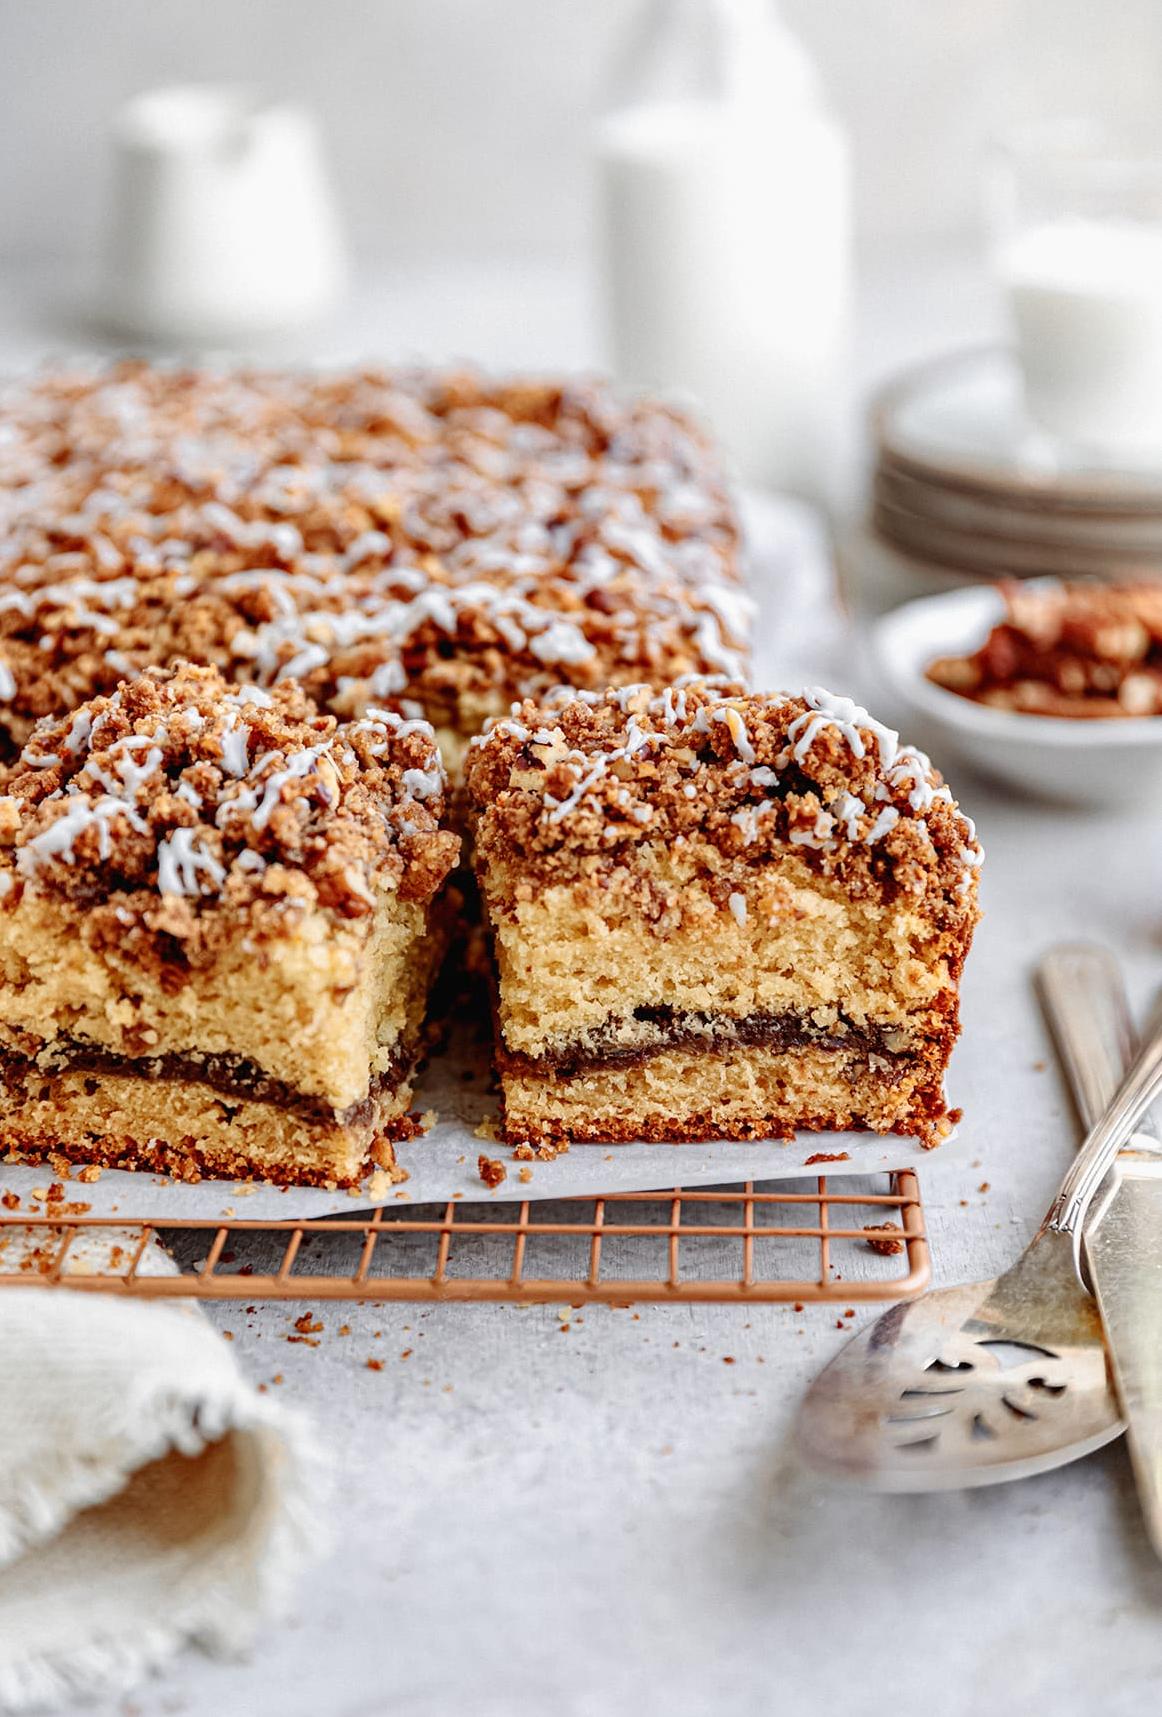  The combination of brown sugar and buttery crumble on this coffee cake is simply irresistible.